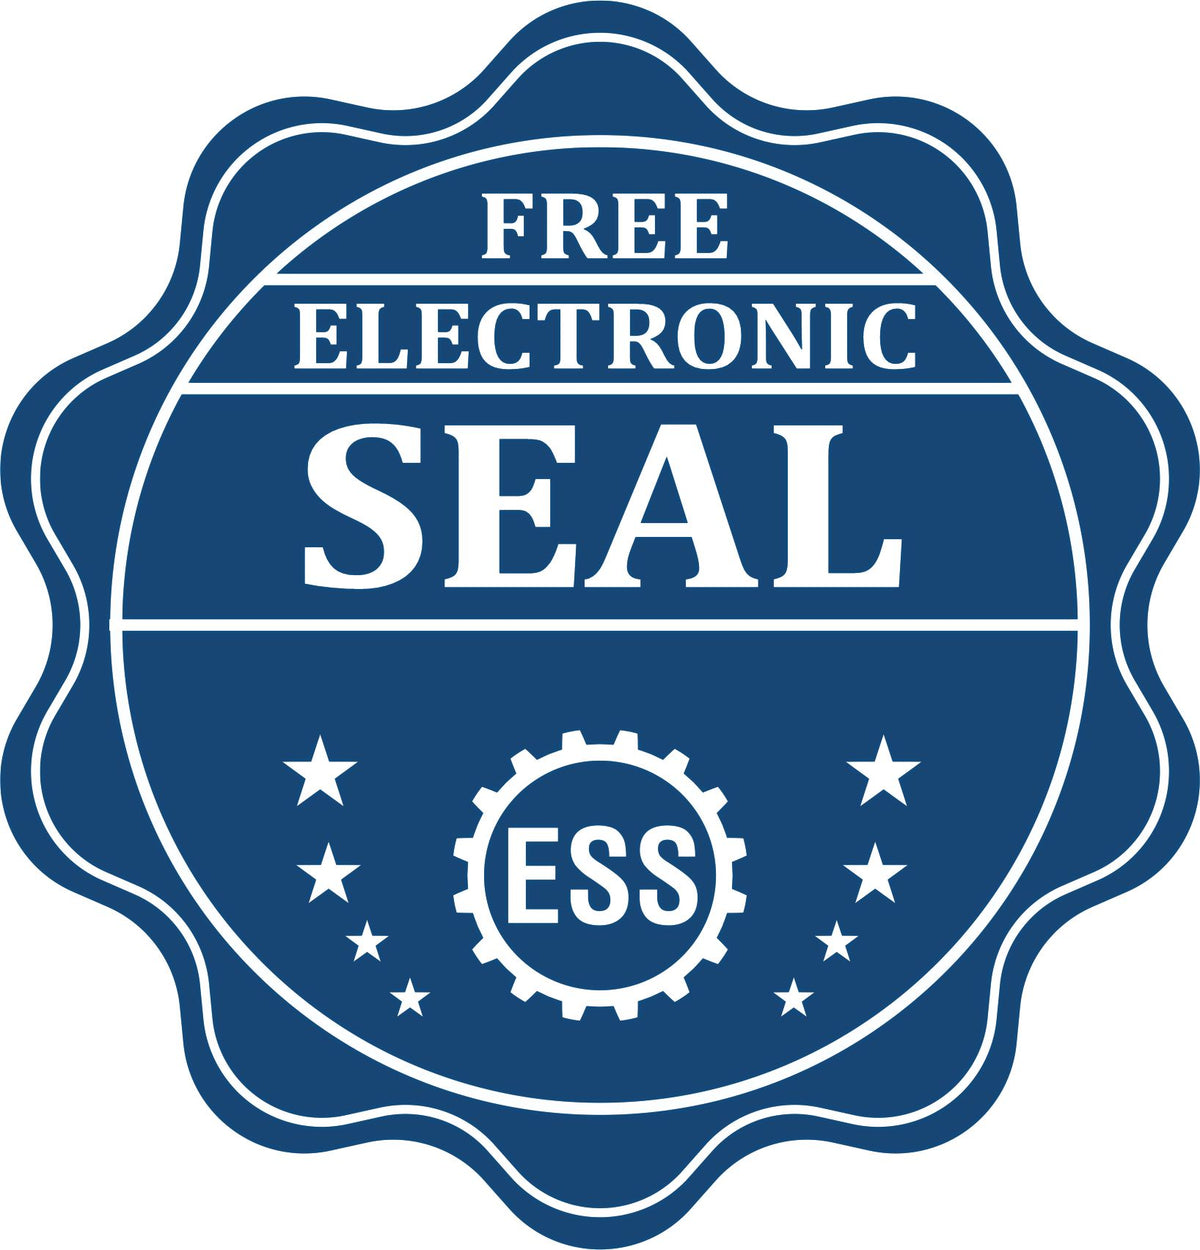 A badge showing a free electronic seal for the Soft Pocket Pennsylvania Landscape Architect Embosser with stars and the ESS gear on the emblem.